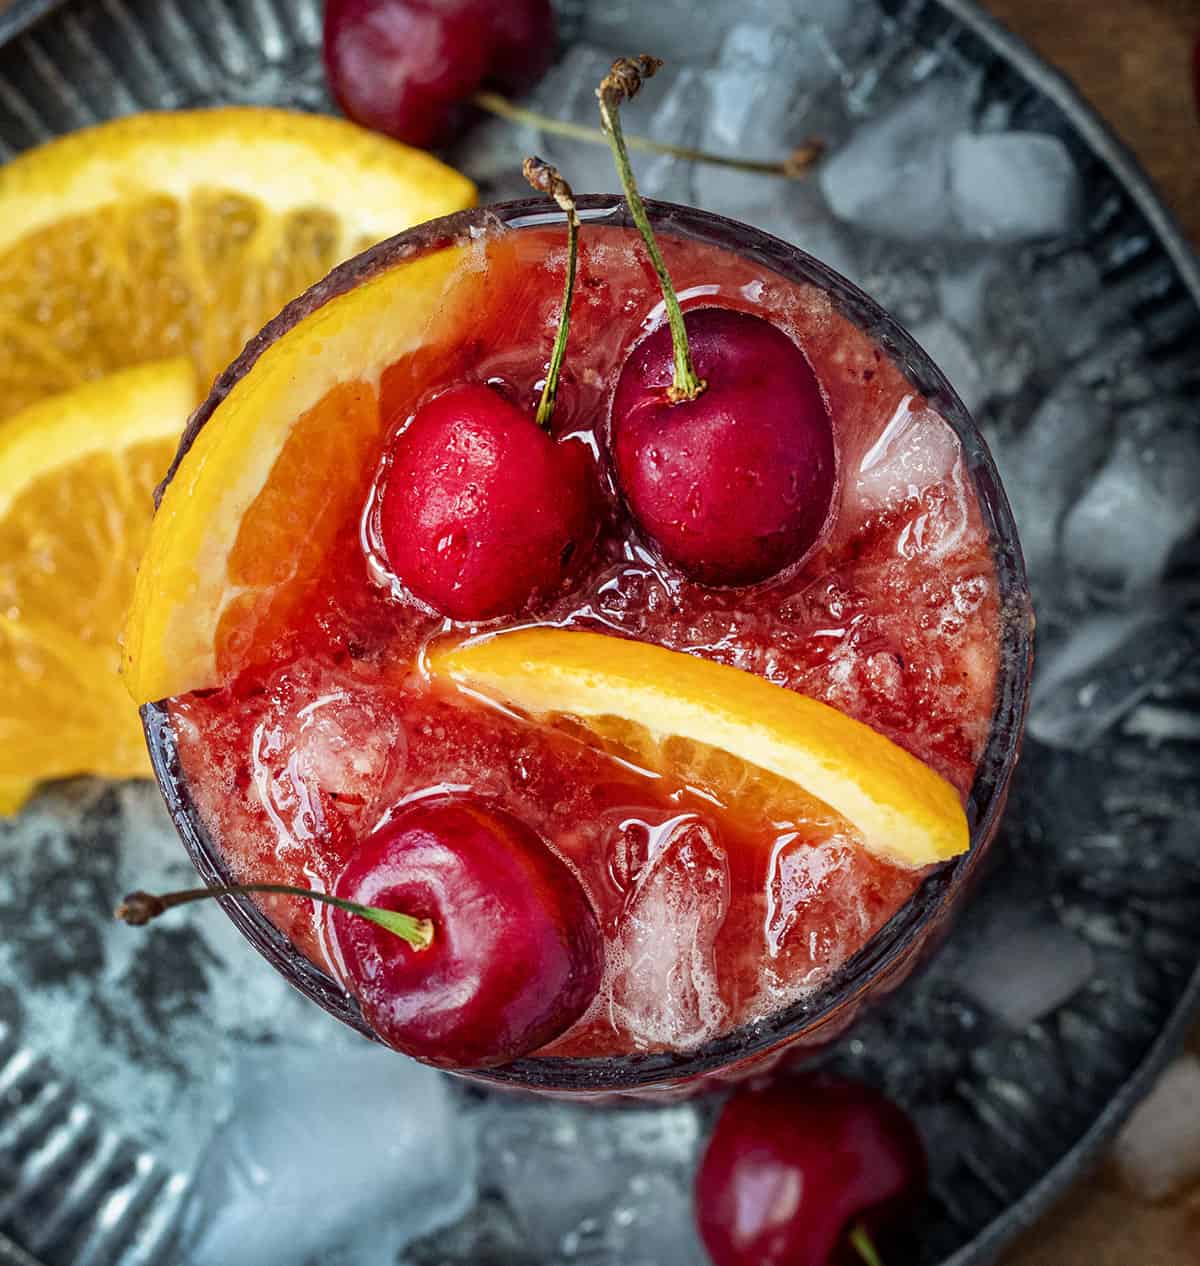 Looking down into a glass of Frozen Old Fashioned with orange slices and fresh cherries.